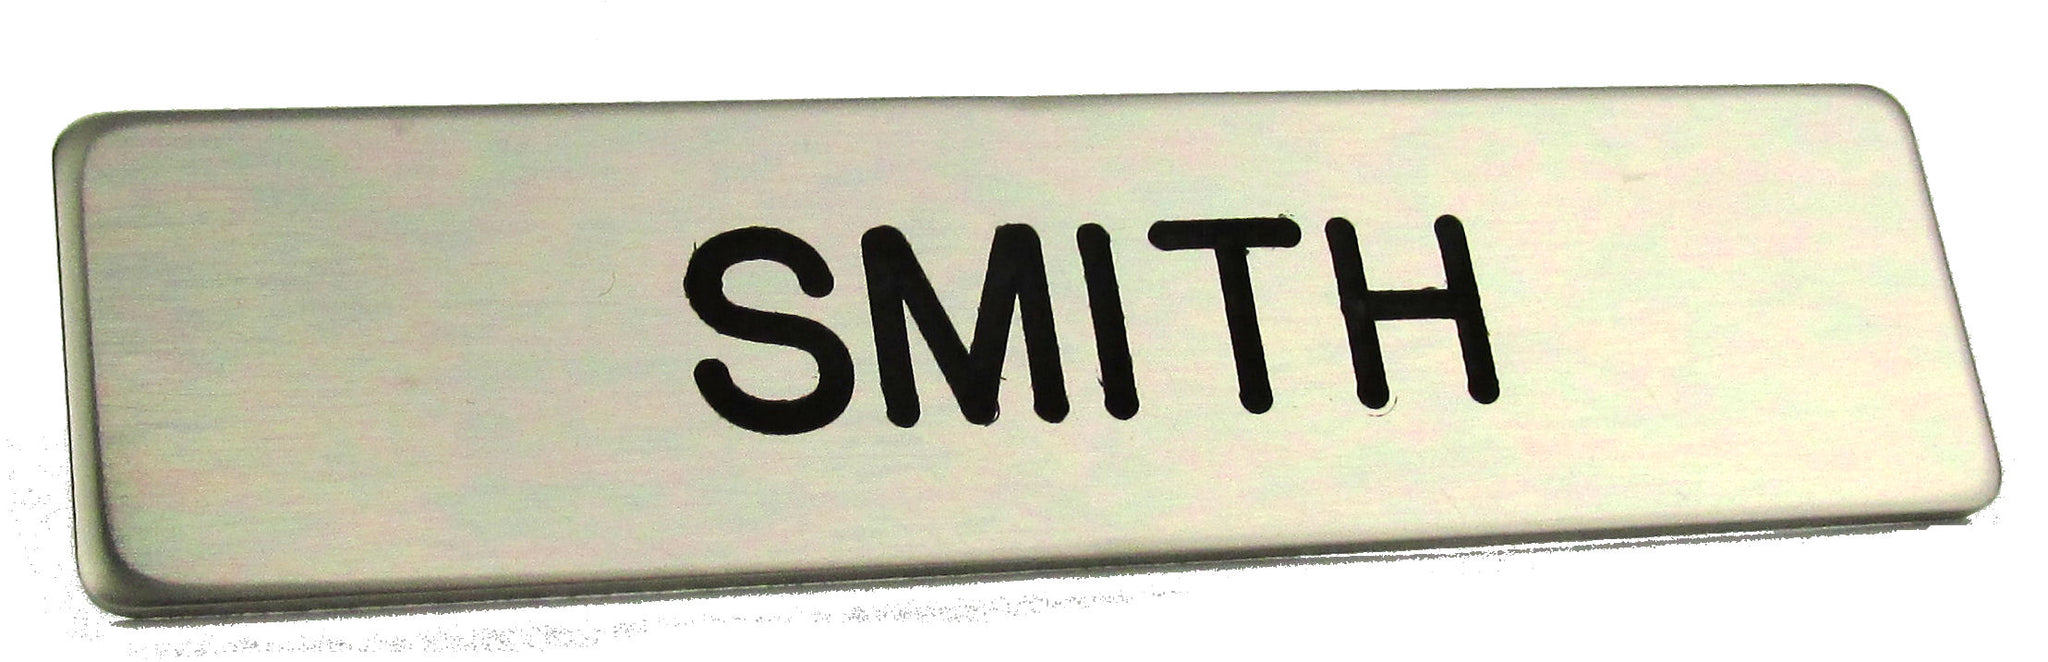 Steel Name Plate for Uniforms SILVER - Law Enforcement Name Tag ...